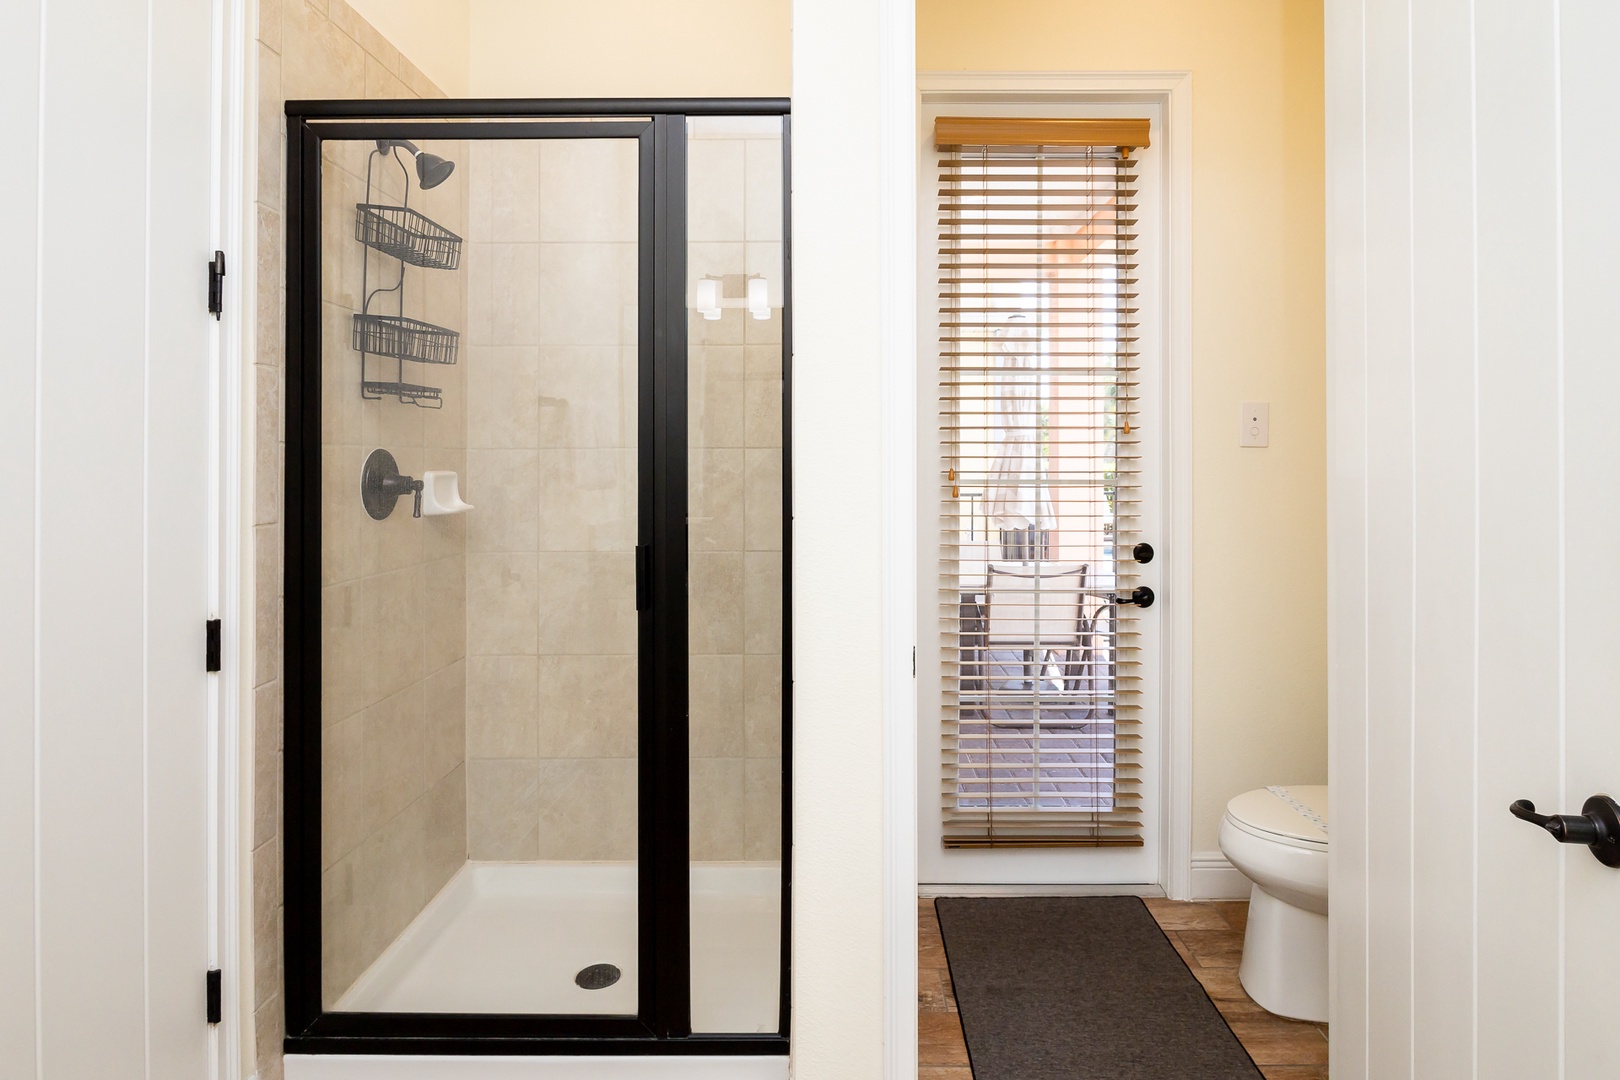 The first-floor ensuite offers a pair of vanities, glass shower, & luxurious tub